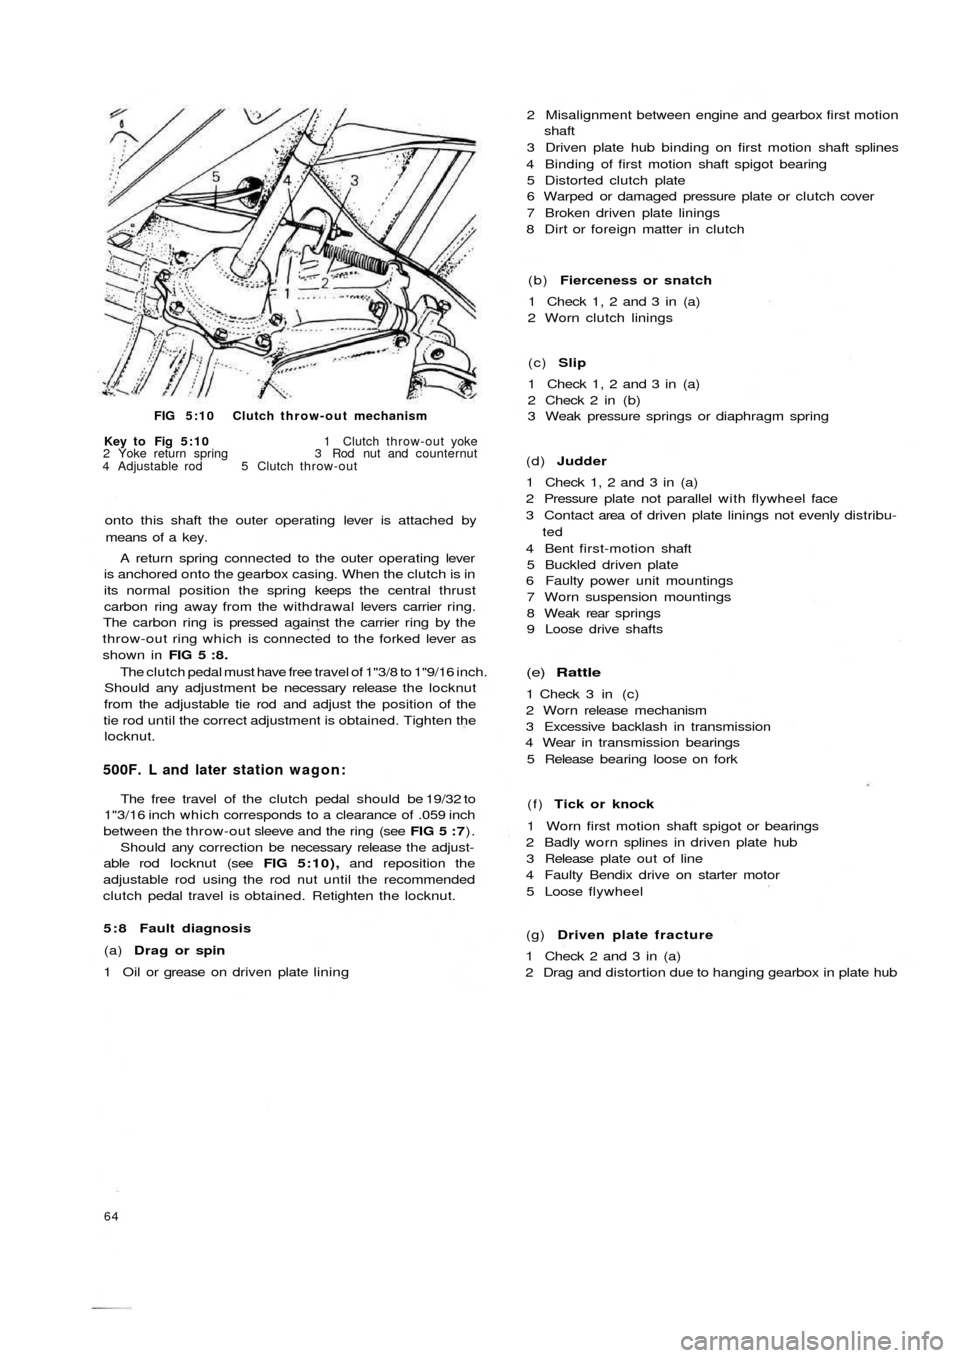 FIAT 500 1959 1.G Workshop Manual FIG 5:10 Clutch throw-out mechanism
Key to  Fig  5:10 1 Clutch throw-out yoke
2 Yoke return spring 3 Rod nut and counternut
4 Adjustable rod  5  Clutch throw-out
onto this shaft the outer operating le